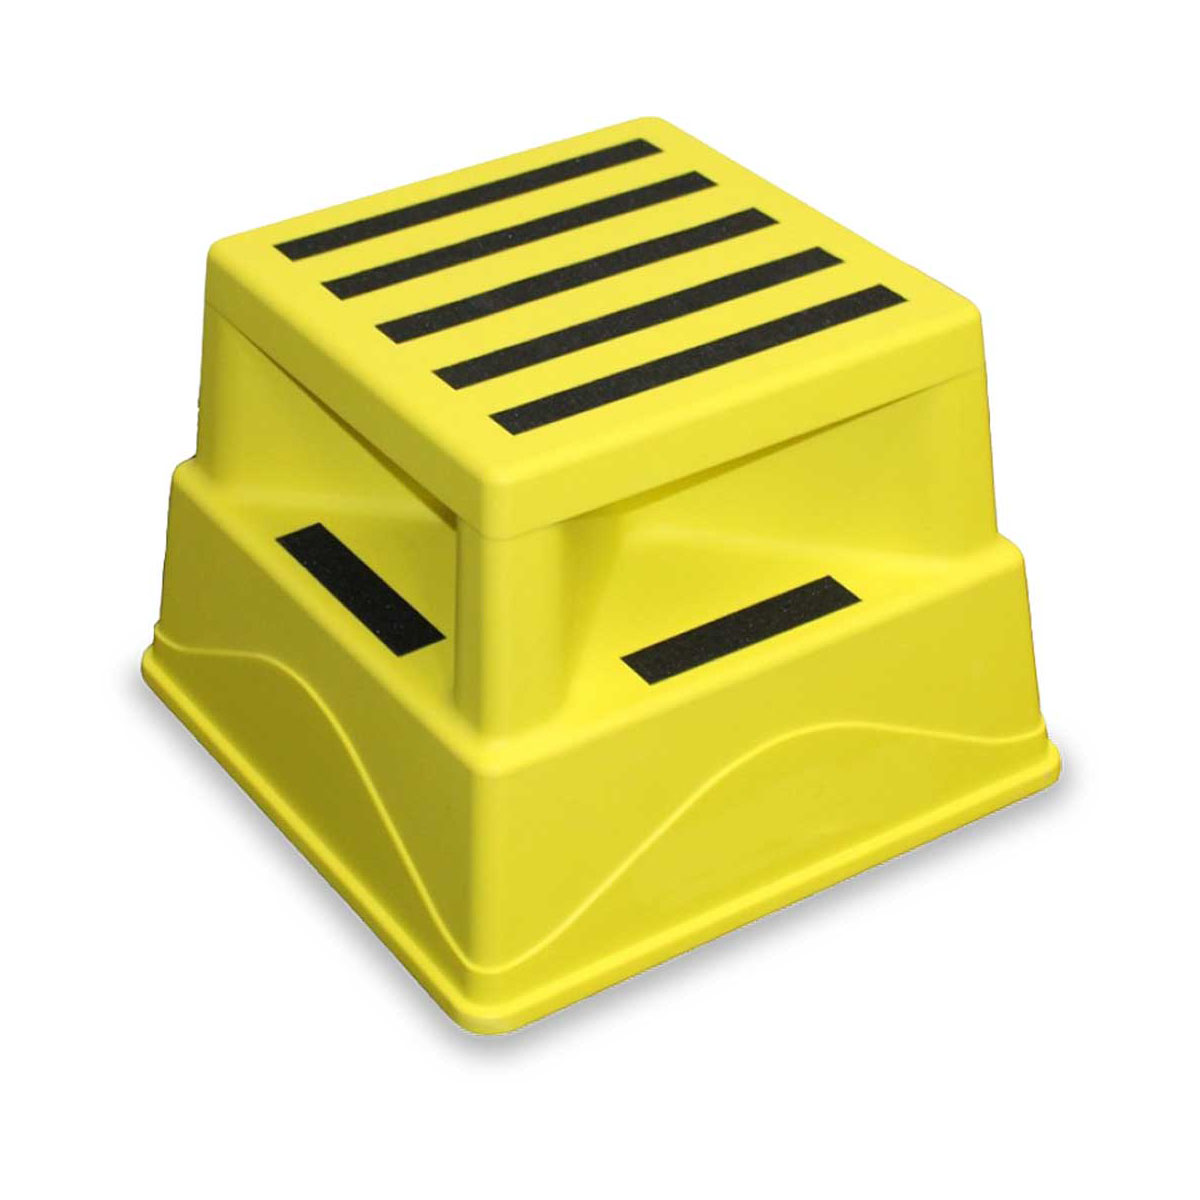 Buy Step Stool - Square HD available at Astrolift NZ